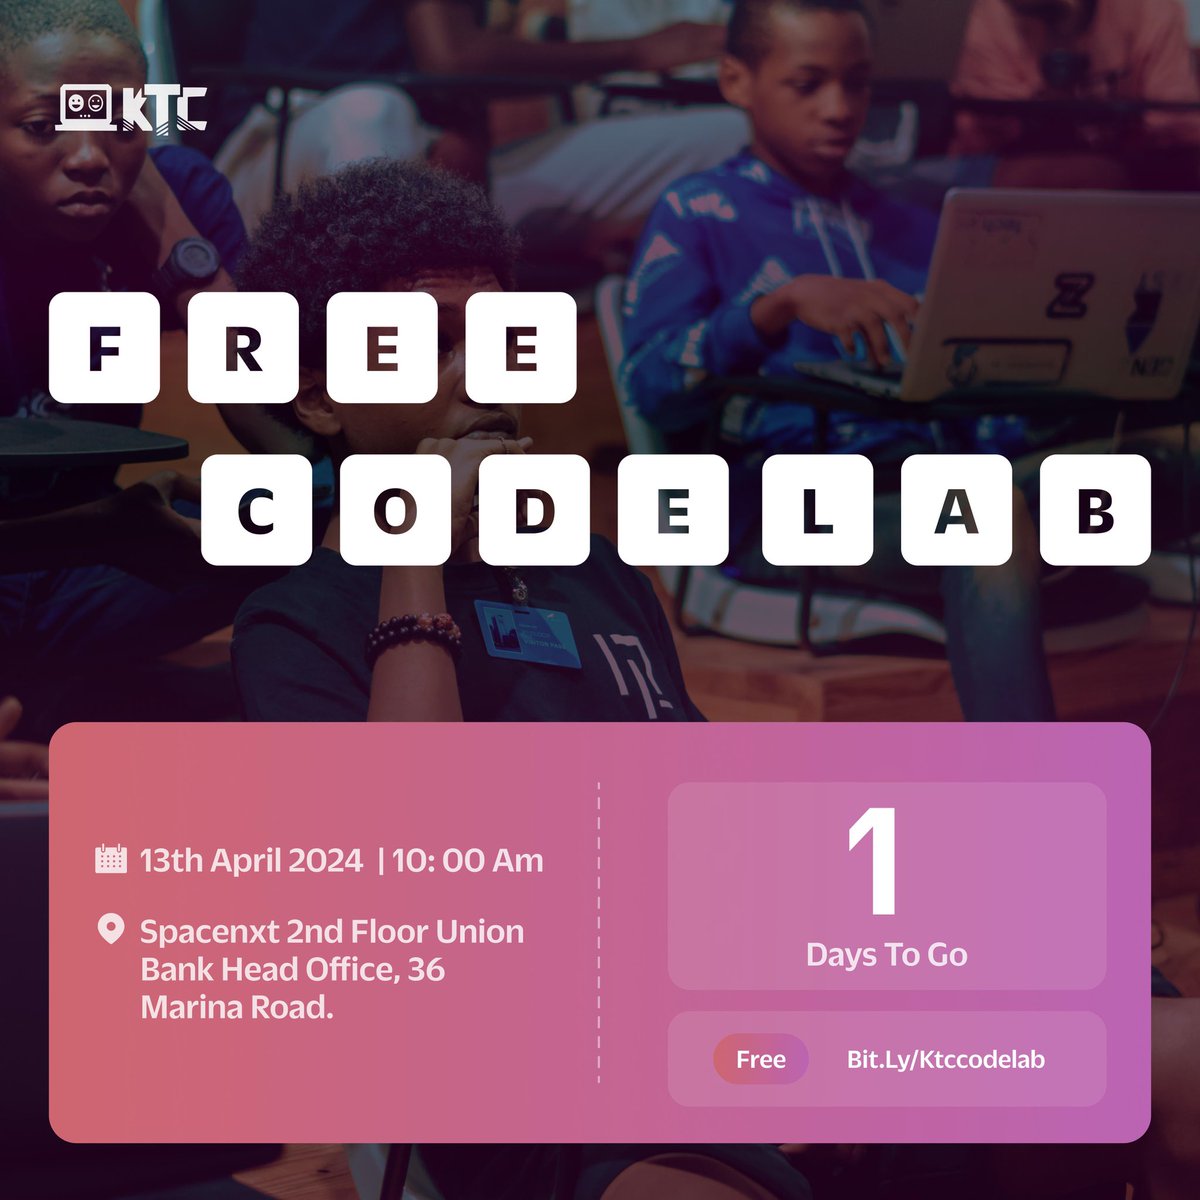 Just one day left! Ensure you're registered and ready for an inspiring day of coding 

Don't miss out!

🗓️ Saturday April 13th,
⏰10am
📍Spacenxt 2nd Floor Union Bank Head Office, 36 Marina Road.

Registration is 100% Free

Link 👉Bit.Ly/Ktccodelab

#kidsthatcode